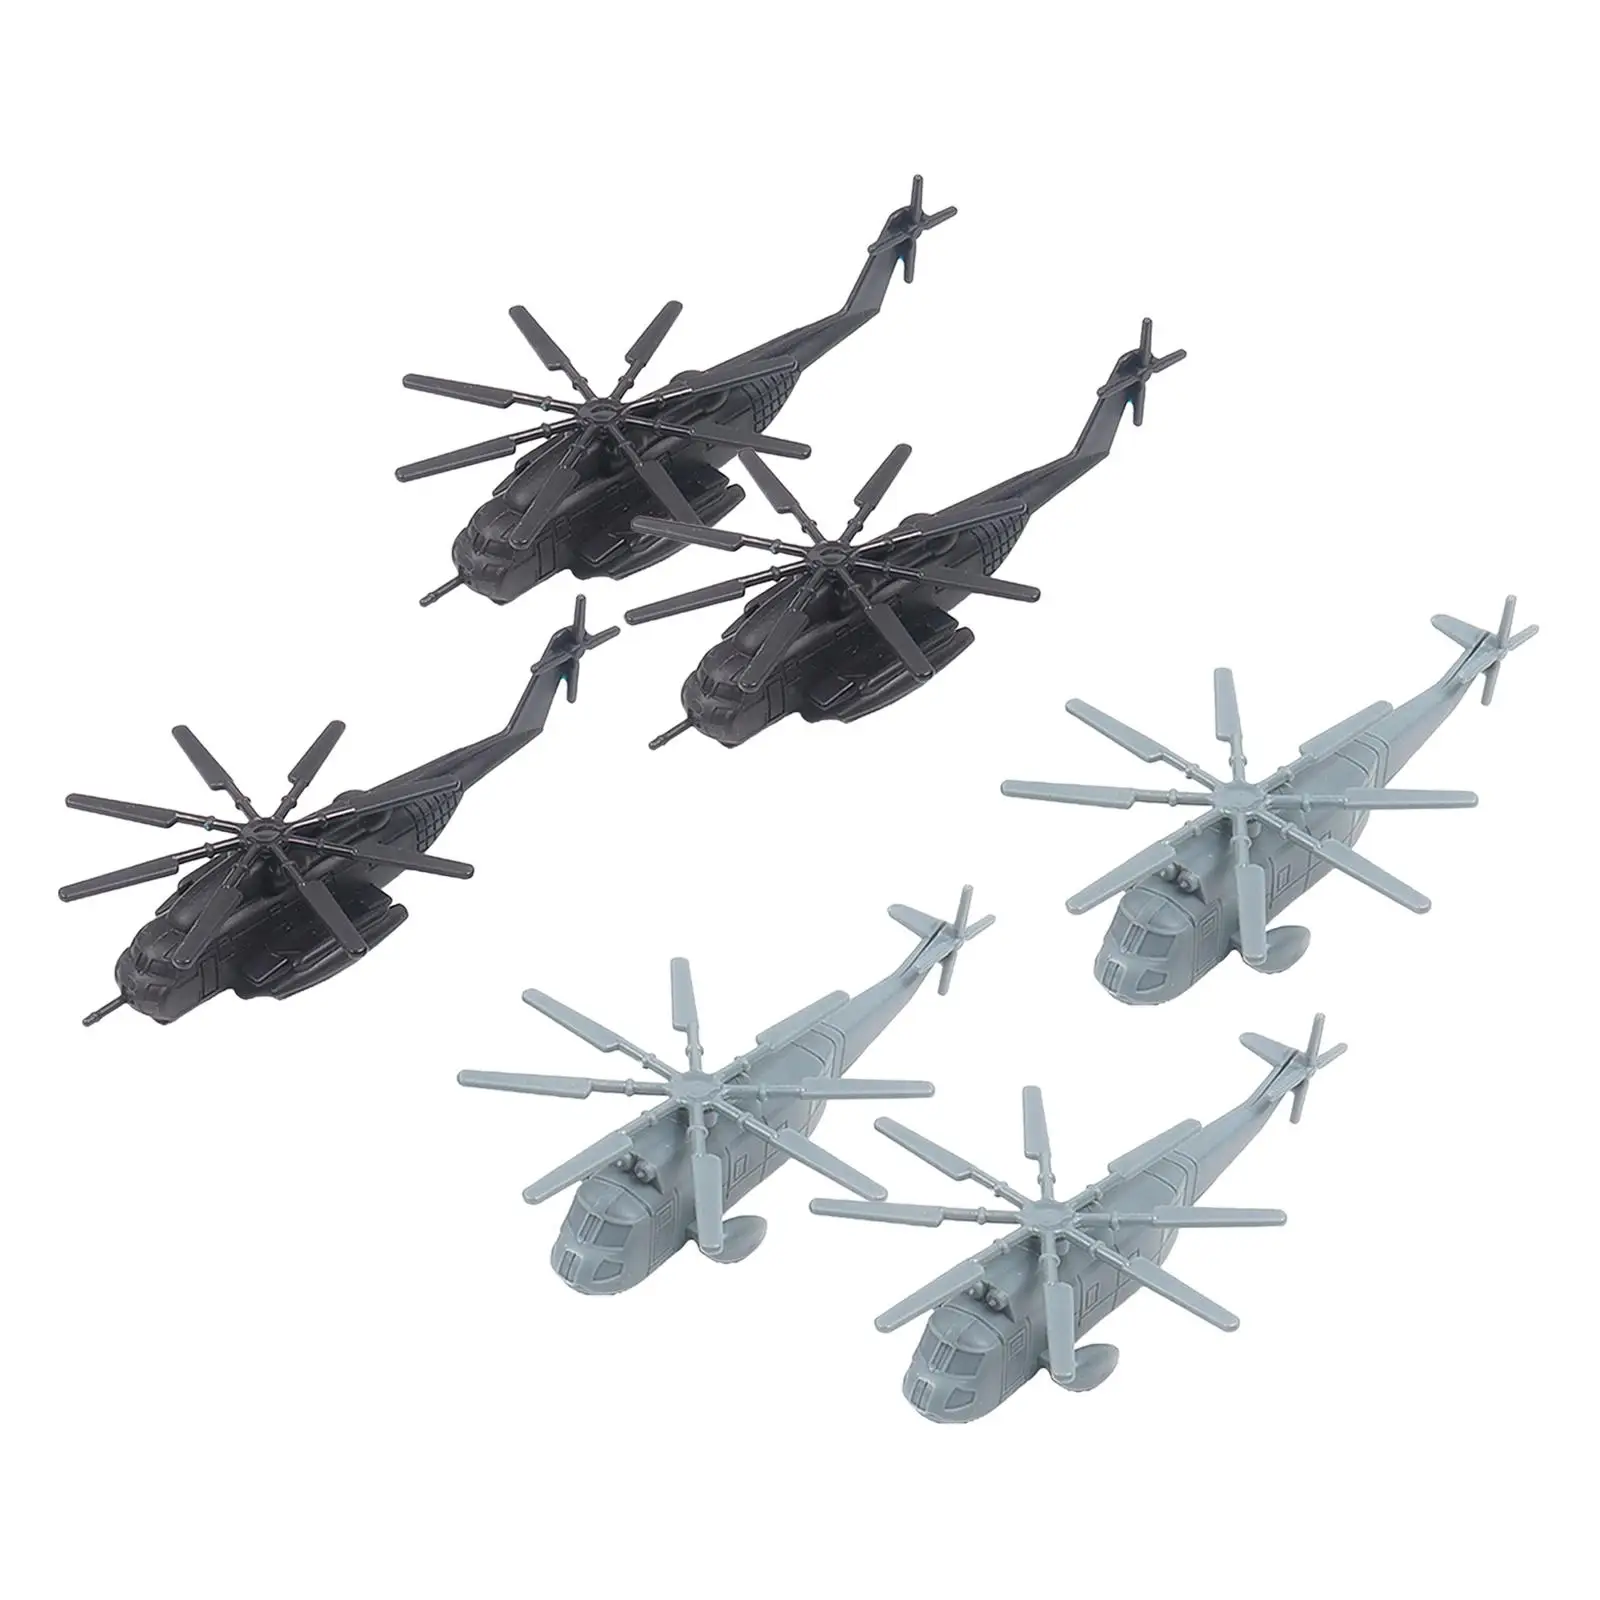 6x Collection Helicopter DIY Scene Props for Boy Girl Micro Landscape Parts Desktop Decor Simulation Aircraft Model Fighter Toy